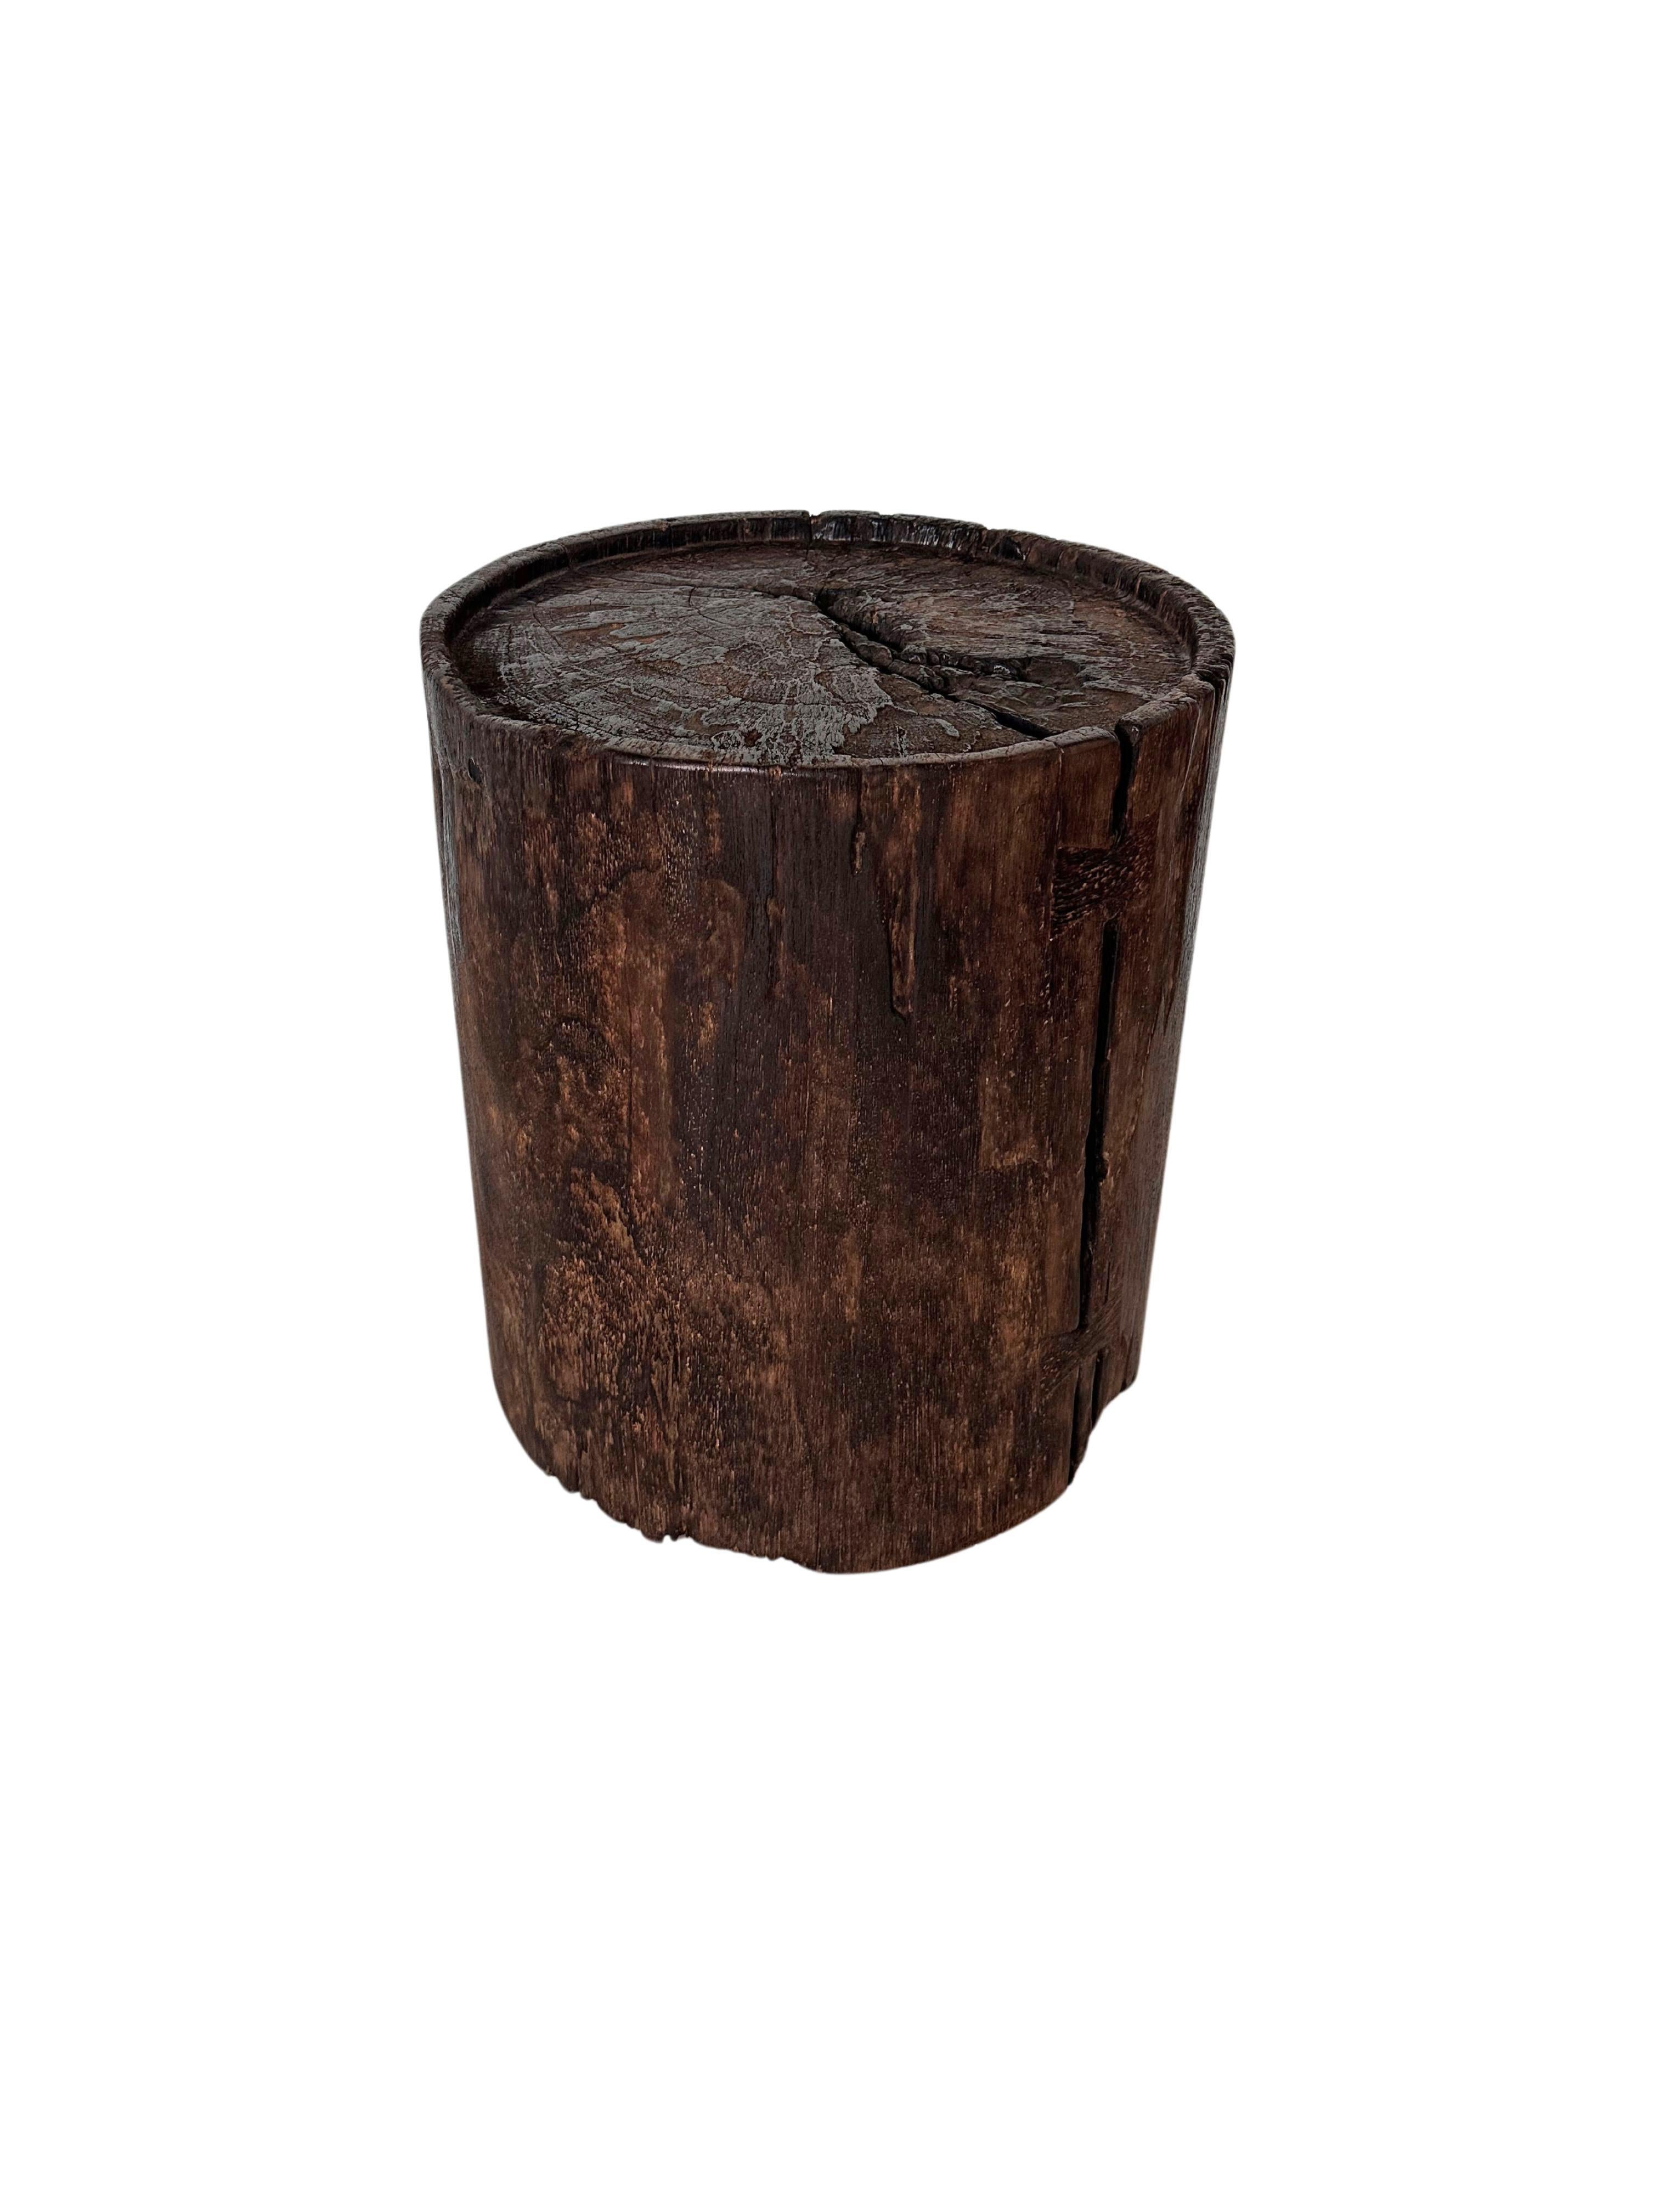 Organic Modern Solid Suar Wood Round Side Table Modern Organic For Sale